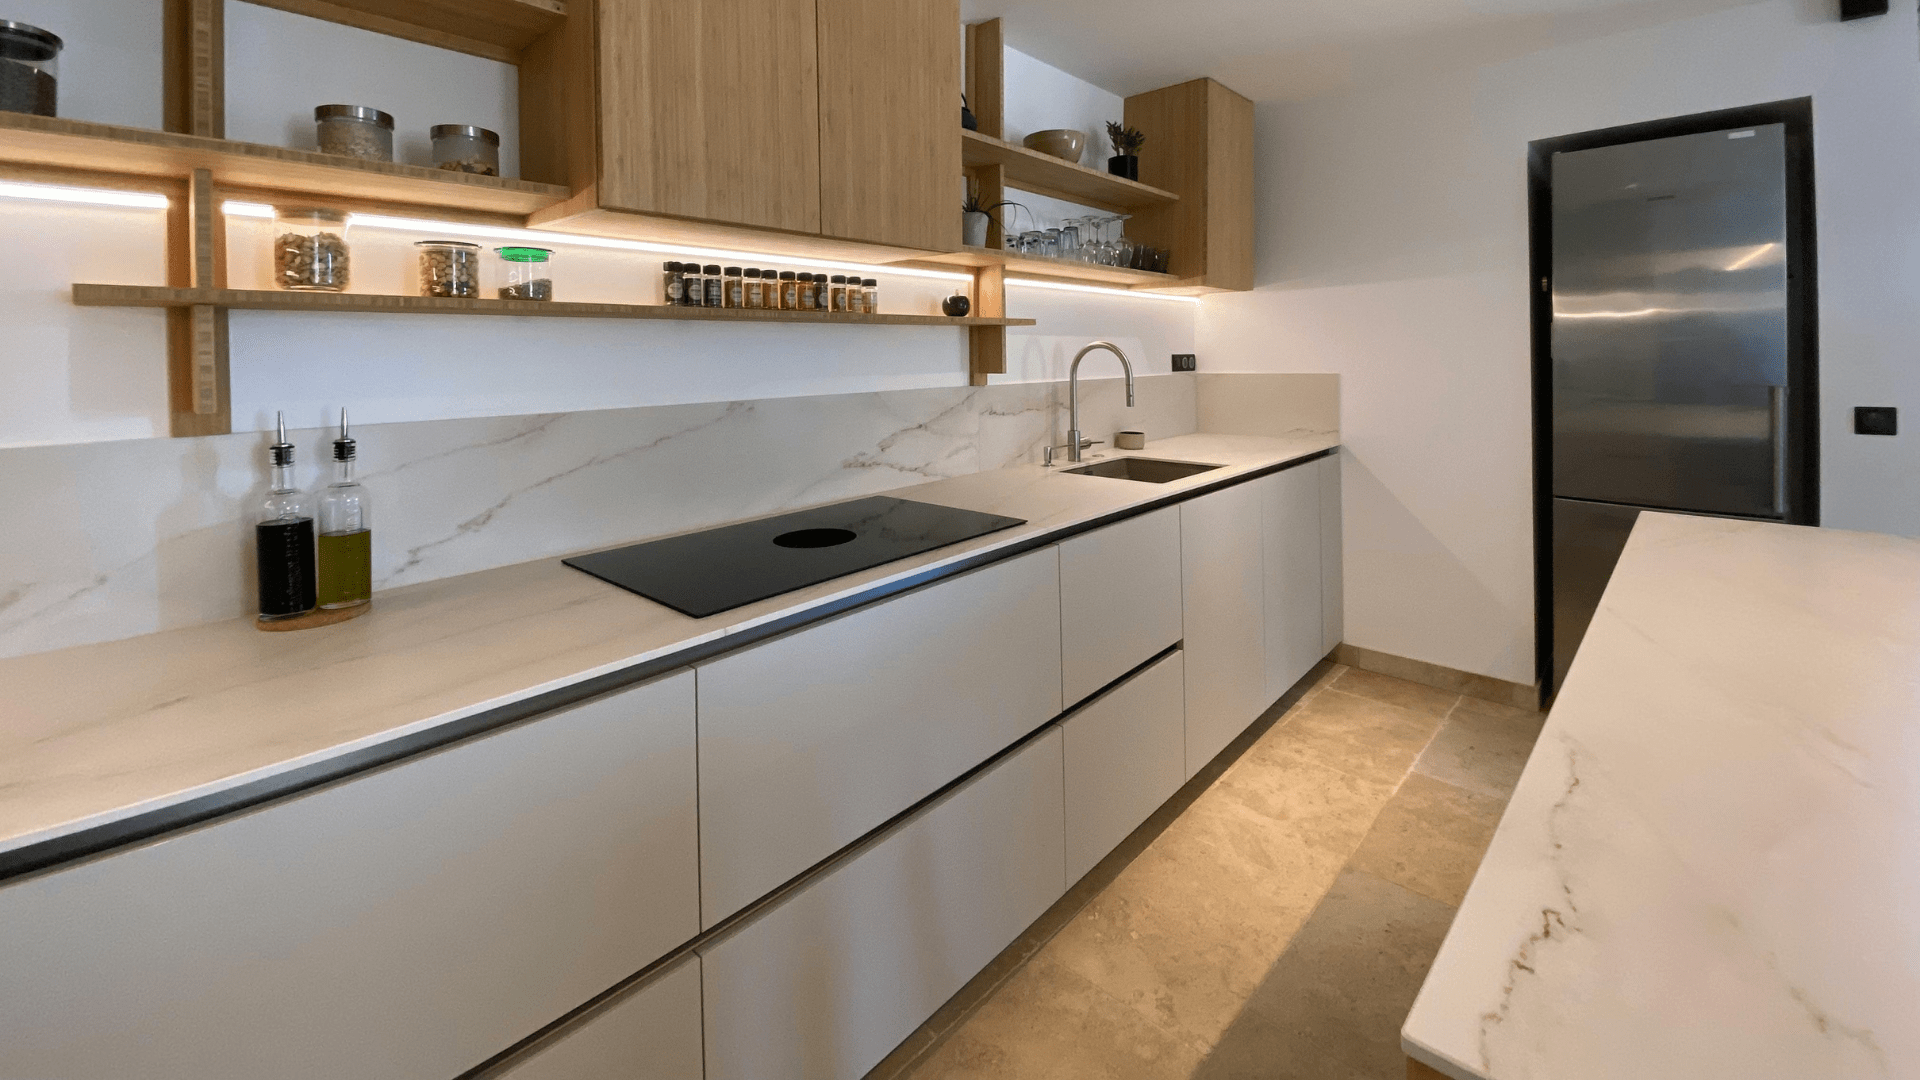 The Influence of Modular Kitchens on Real Estate